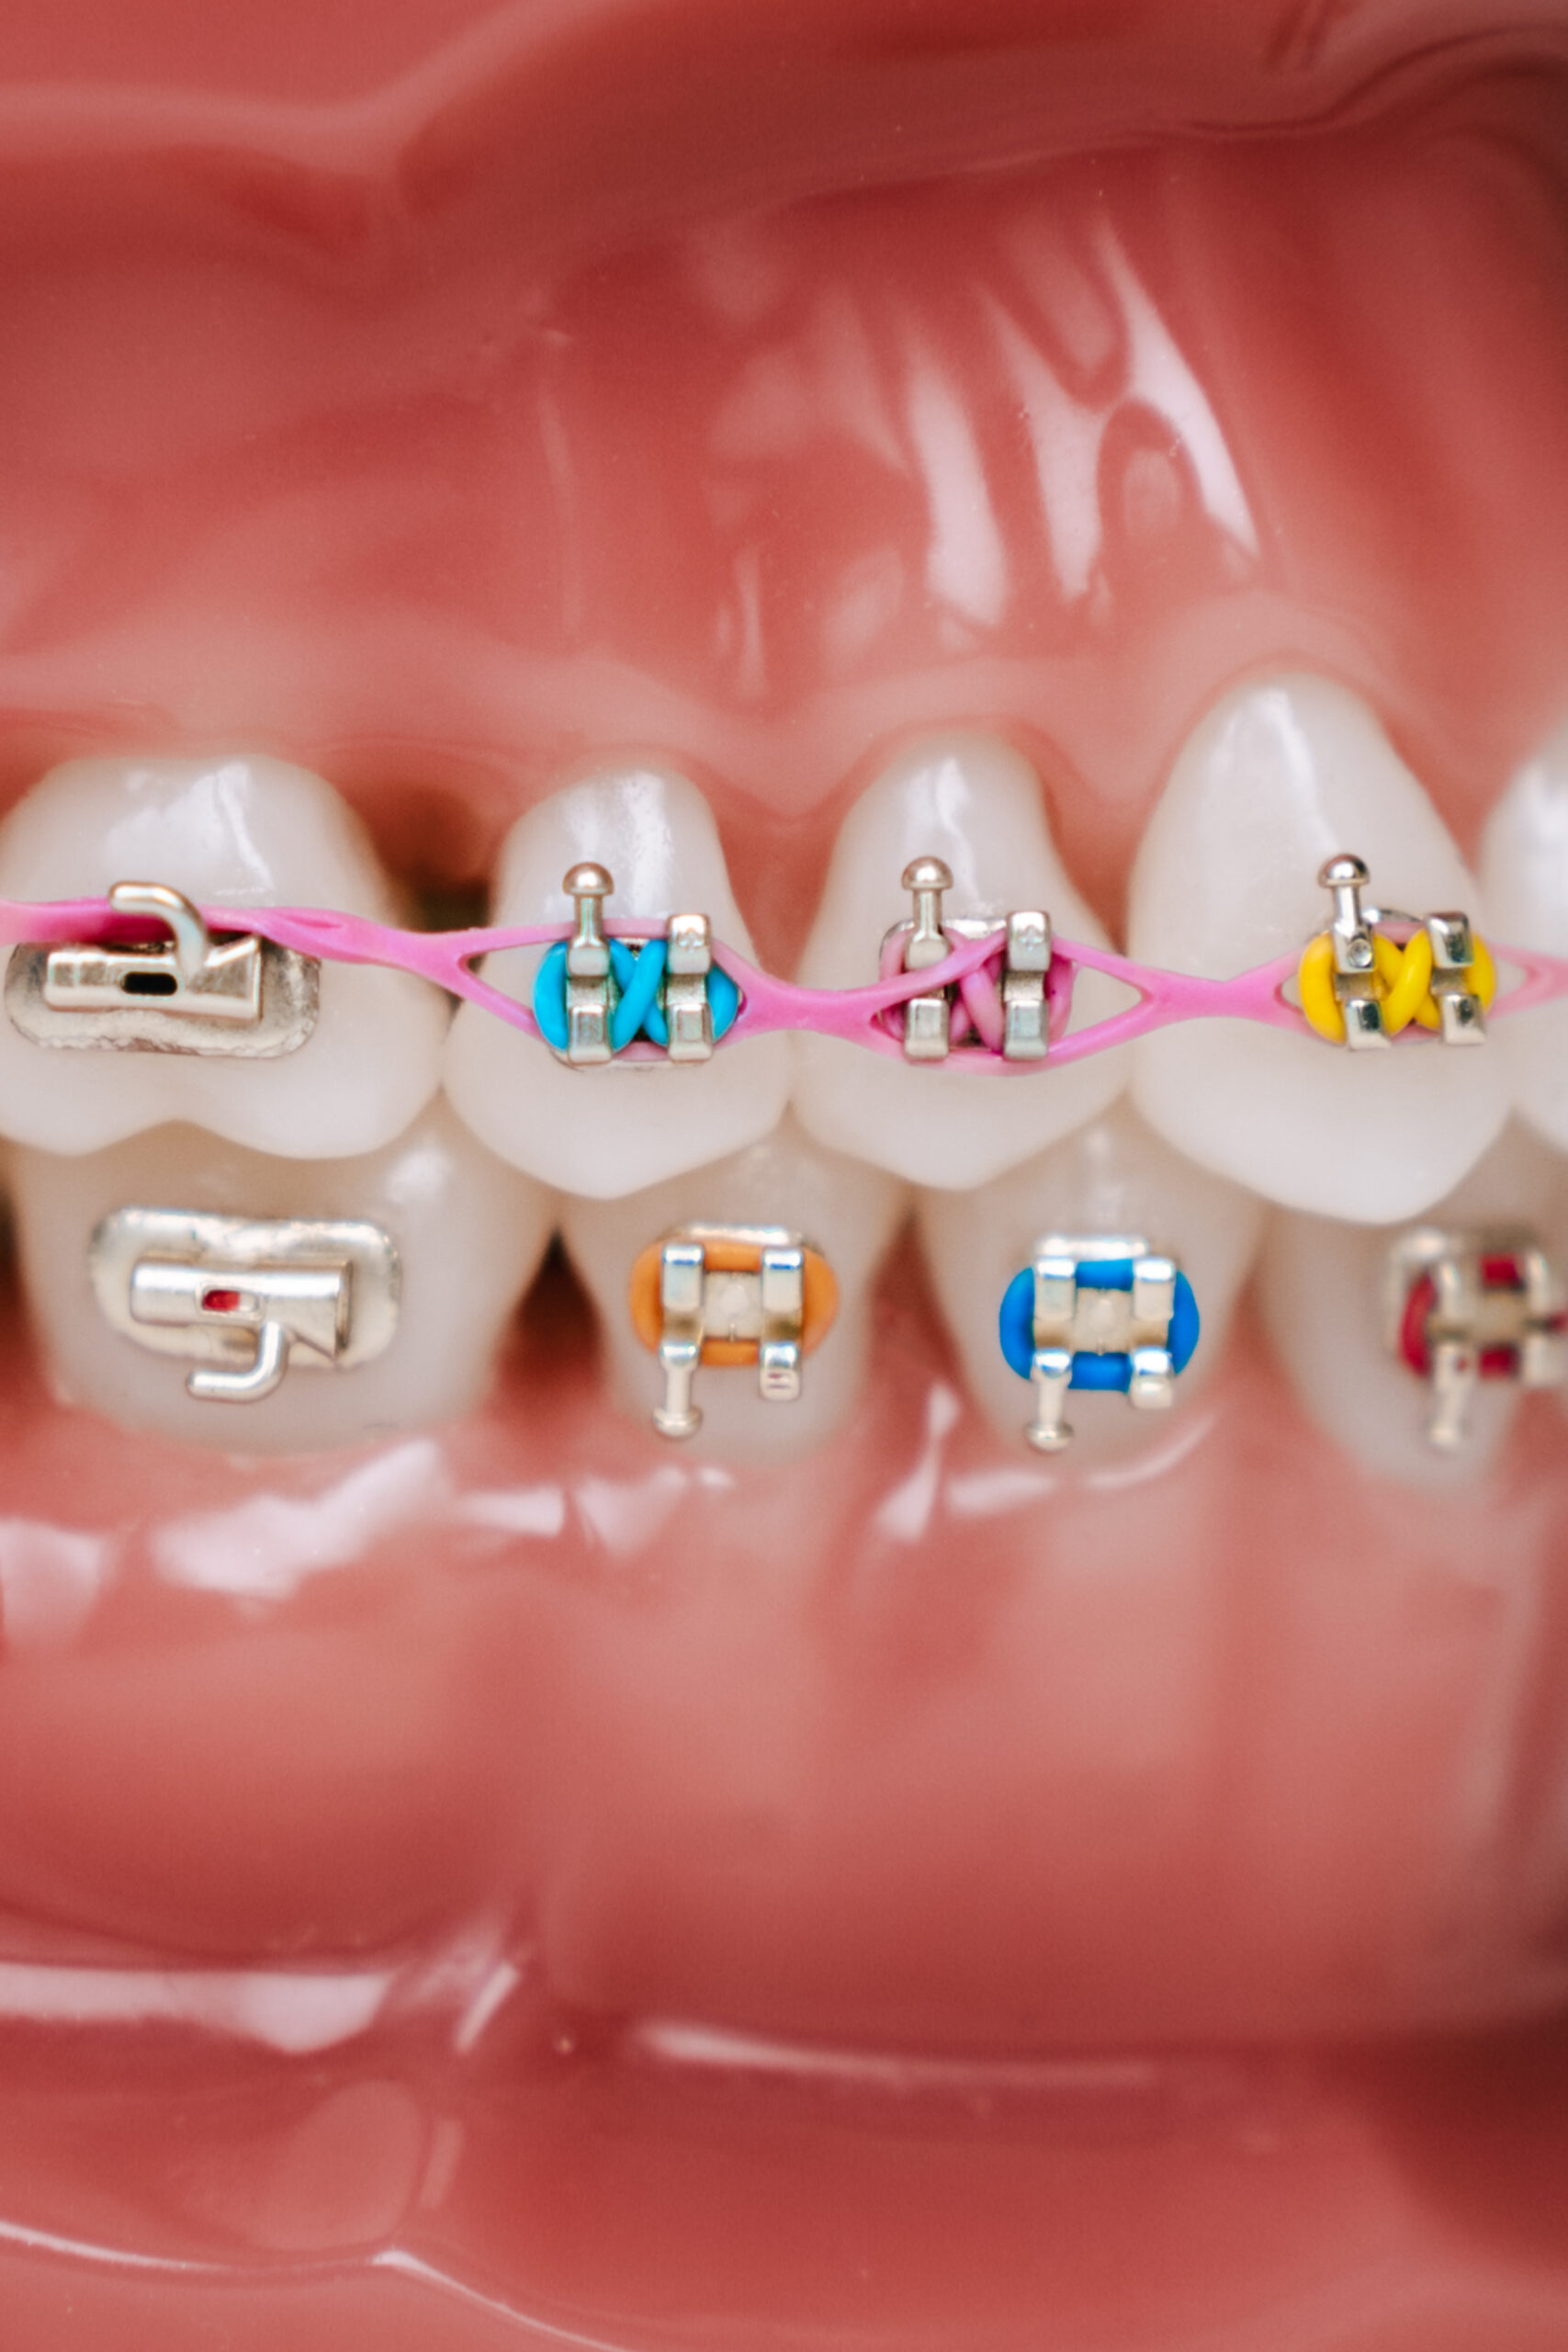 How to and why wear your elastic orthodontic bands, Elastic instructions  for braces are here